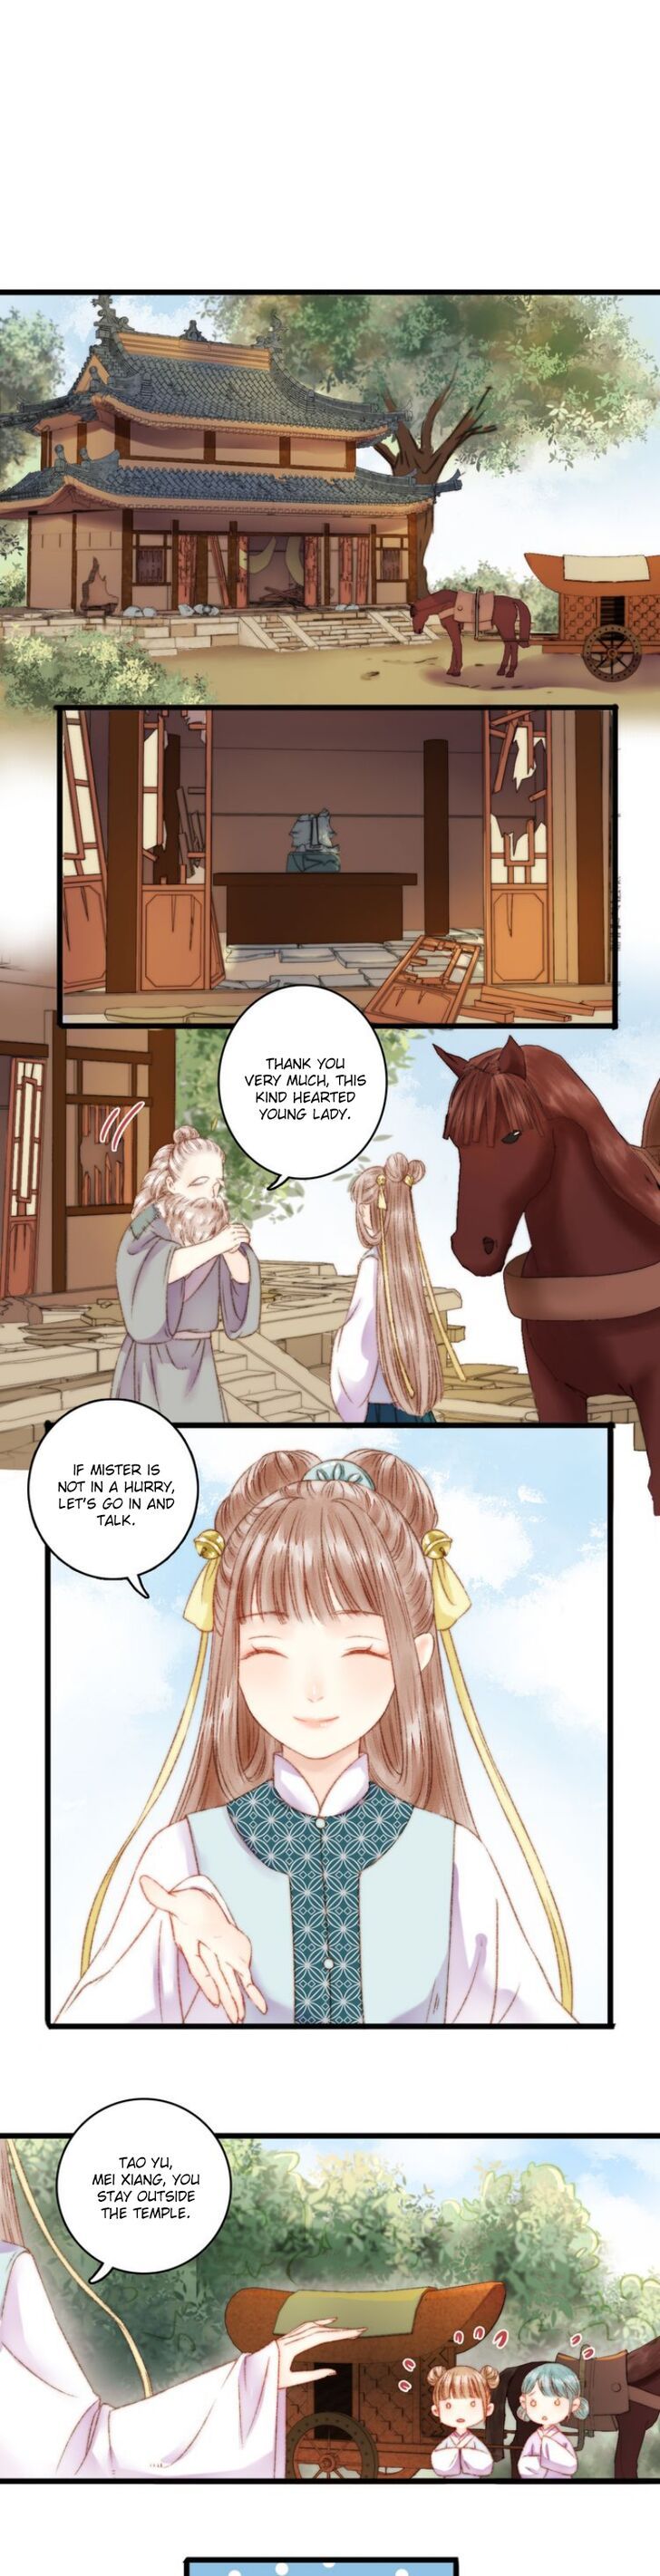 The Goddess of Healing Chapter 005 page 3